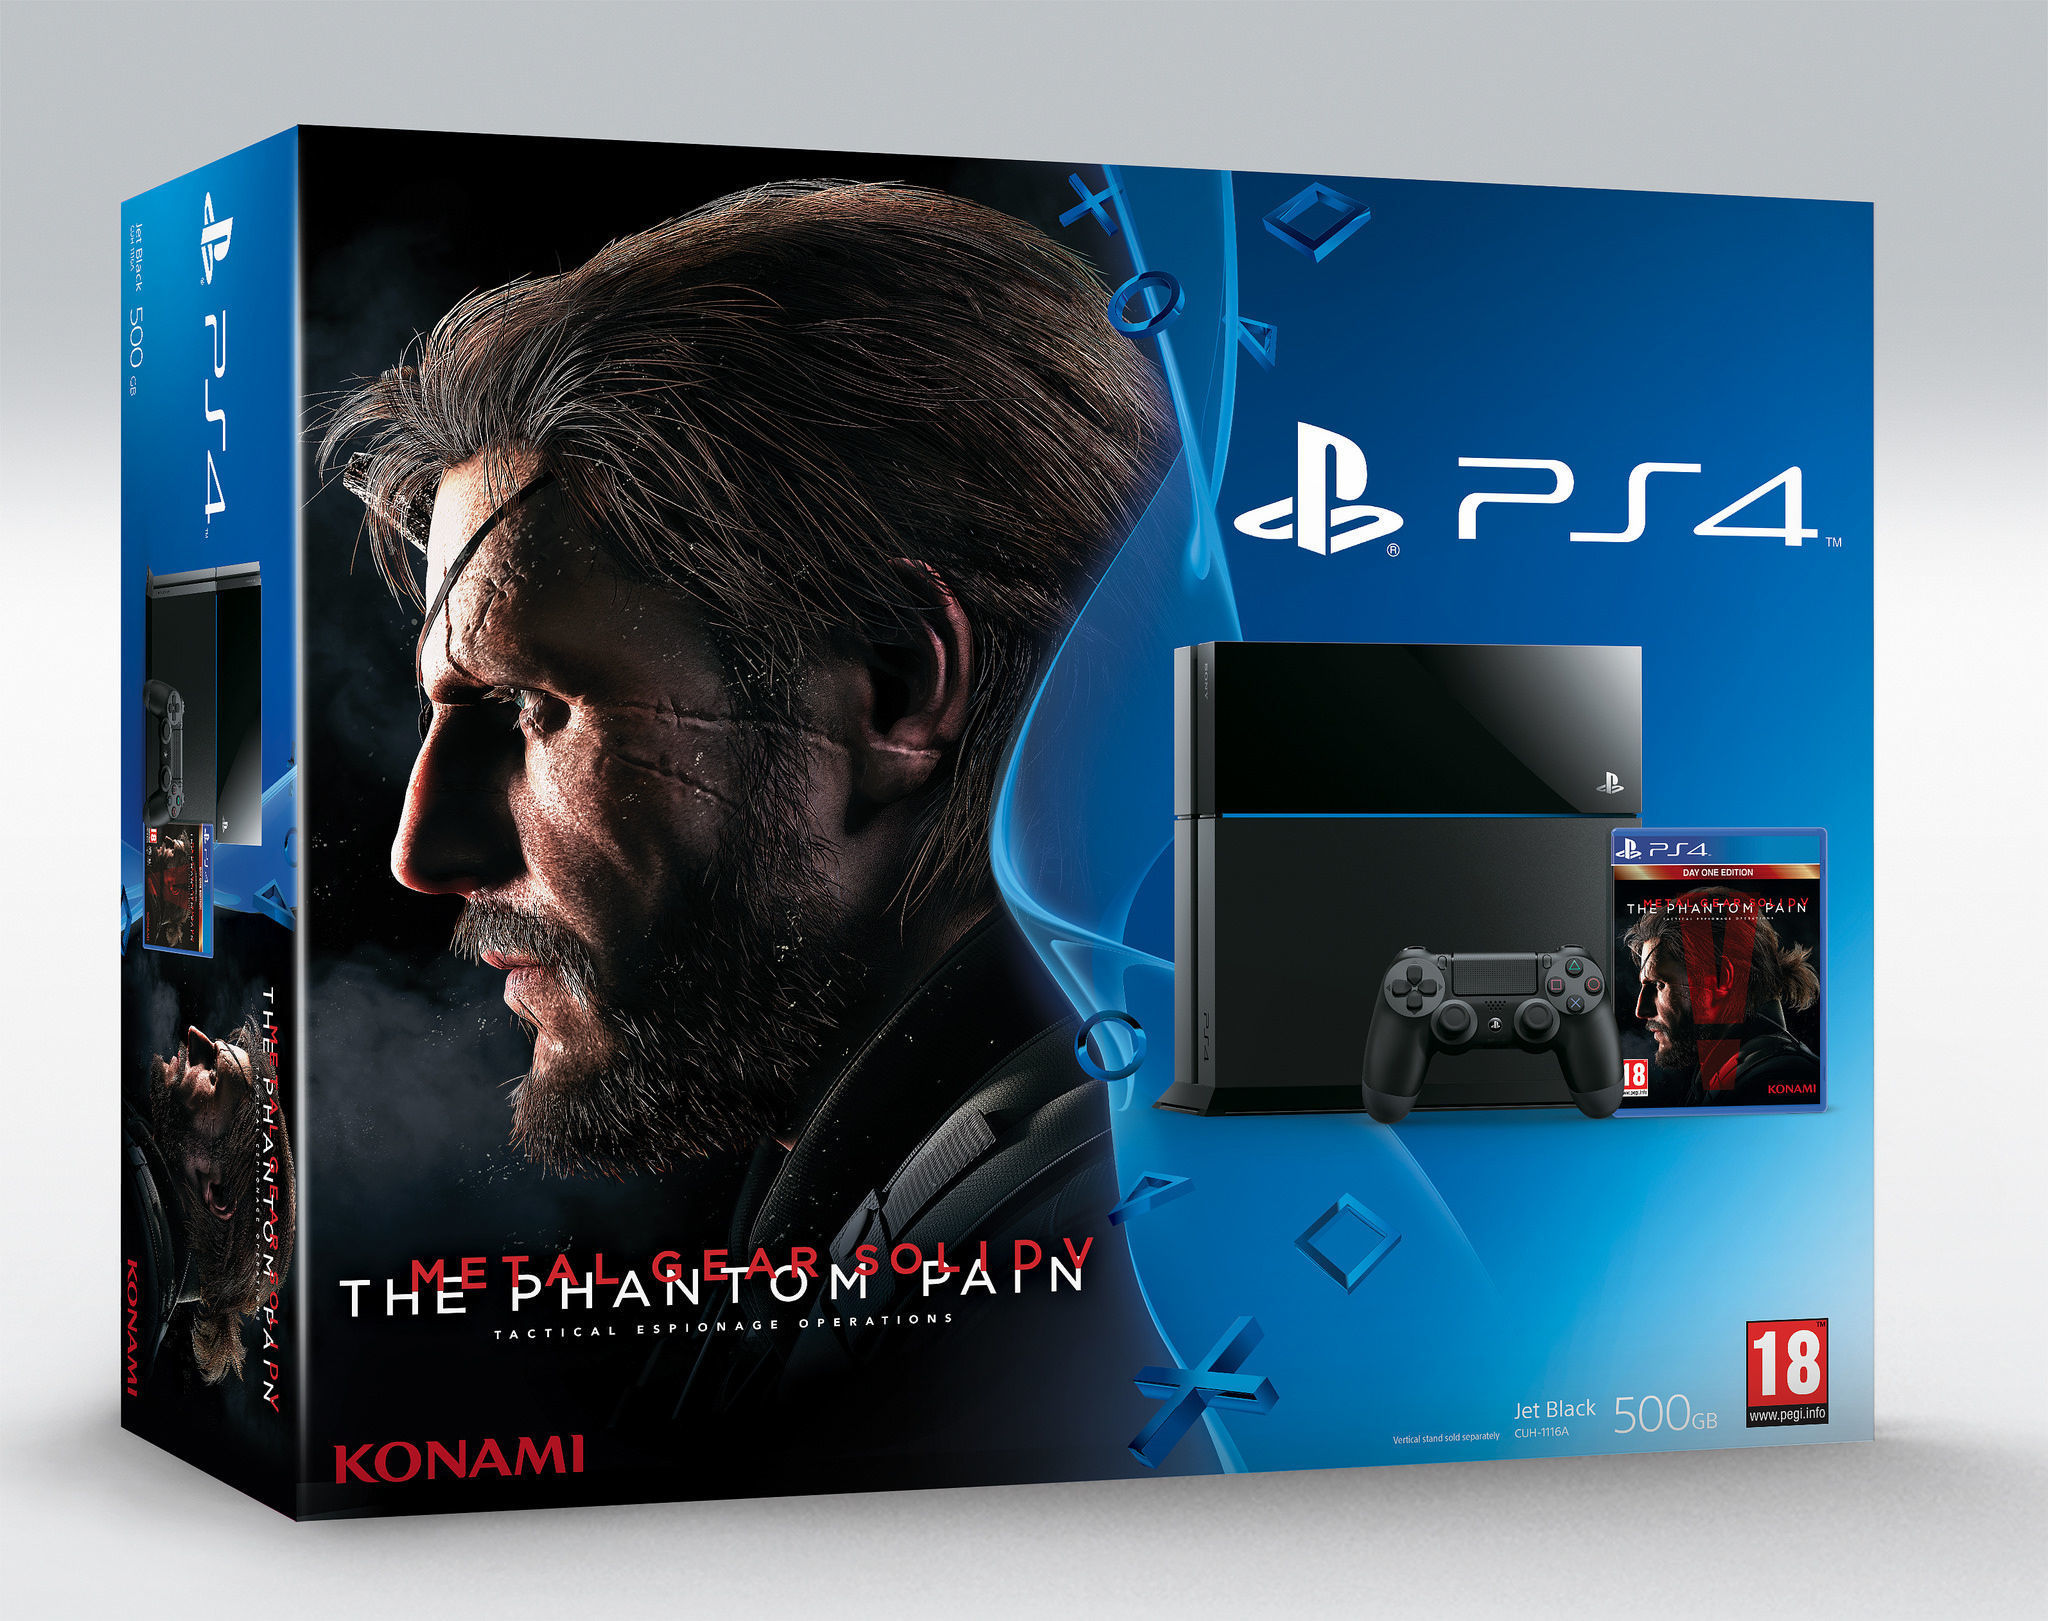 PlayStation 4 (500 GB) + Metal Gear Solid V: The Phantom Pain (PS4), Sony Computer Entertainment